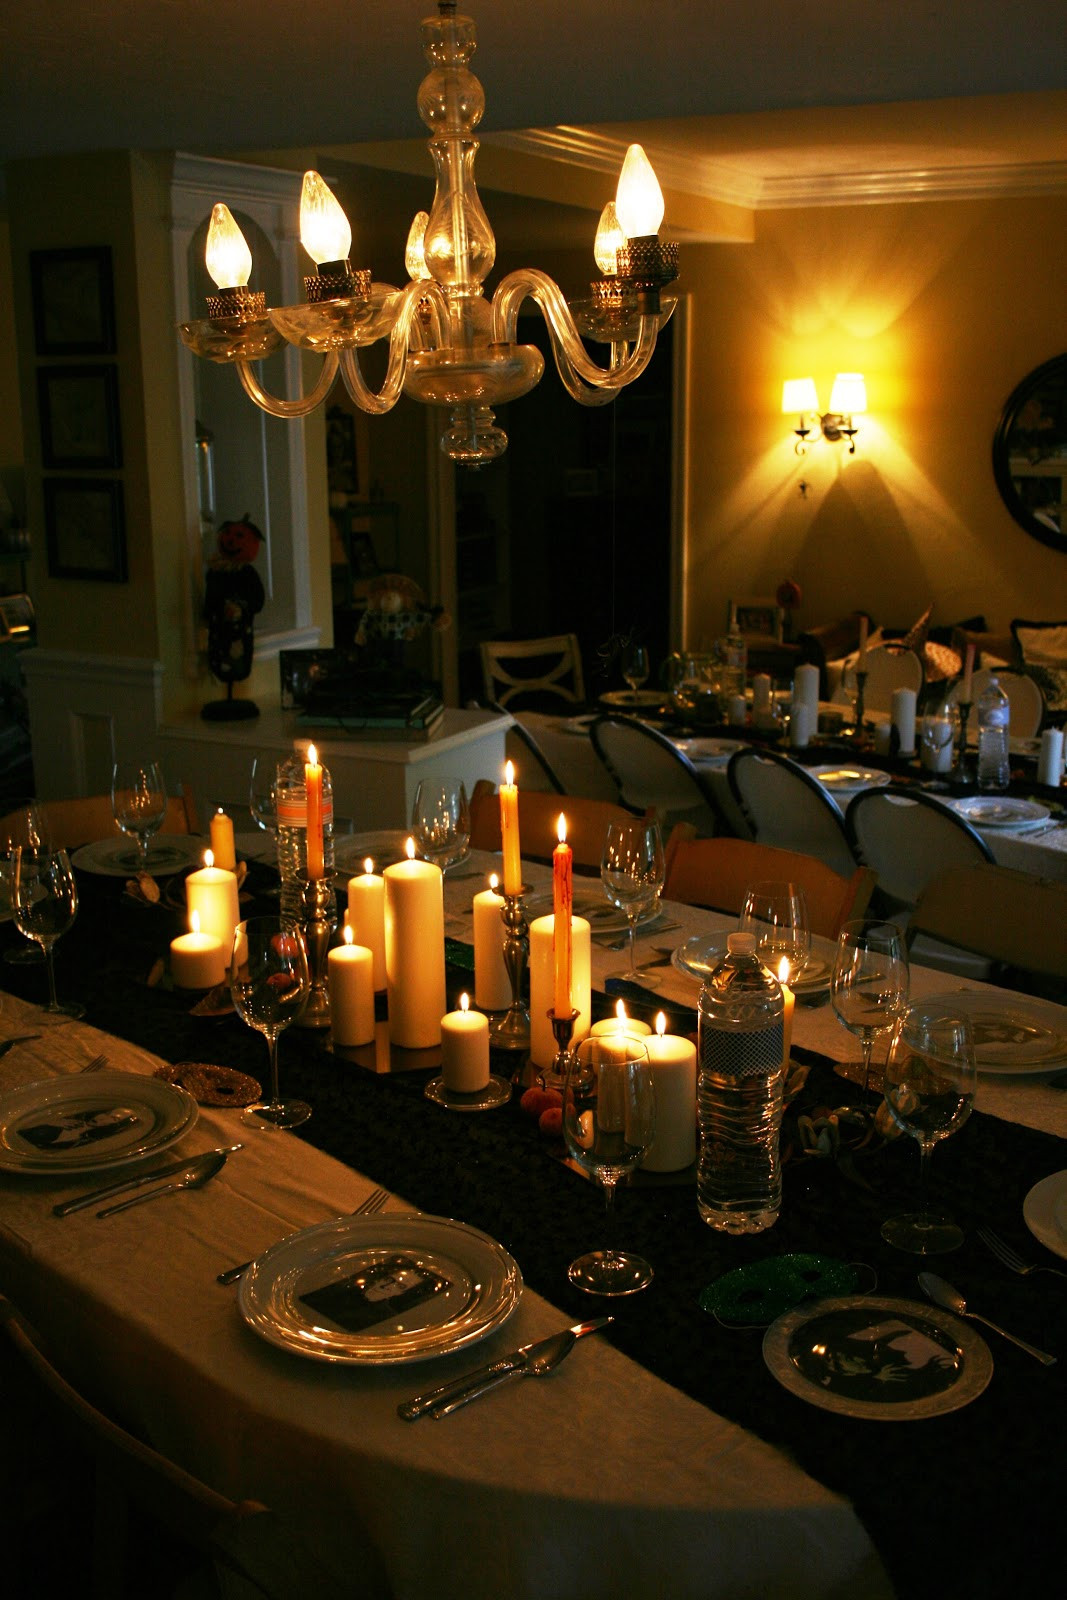 Dinner Ideas For Halloween Party
 ciao newport beach my halloween dinner party preview